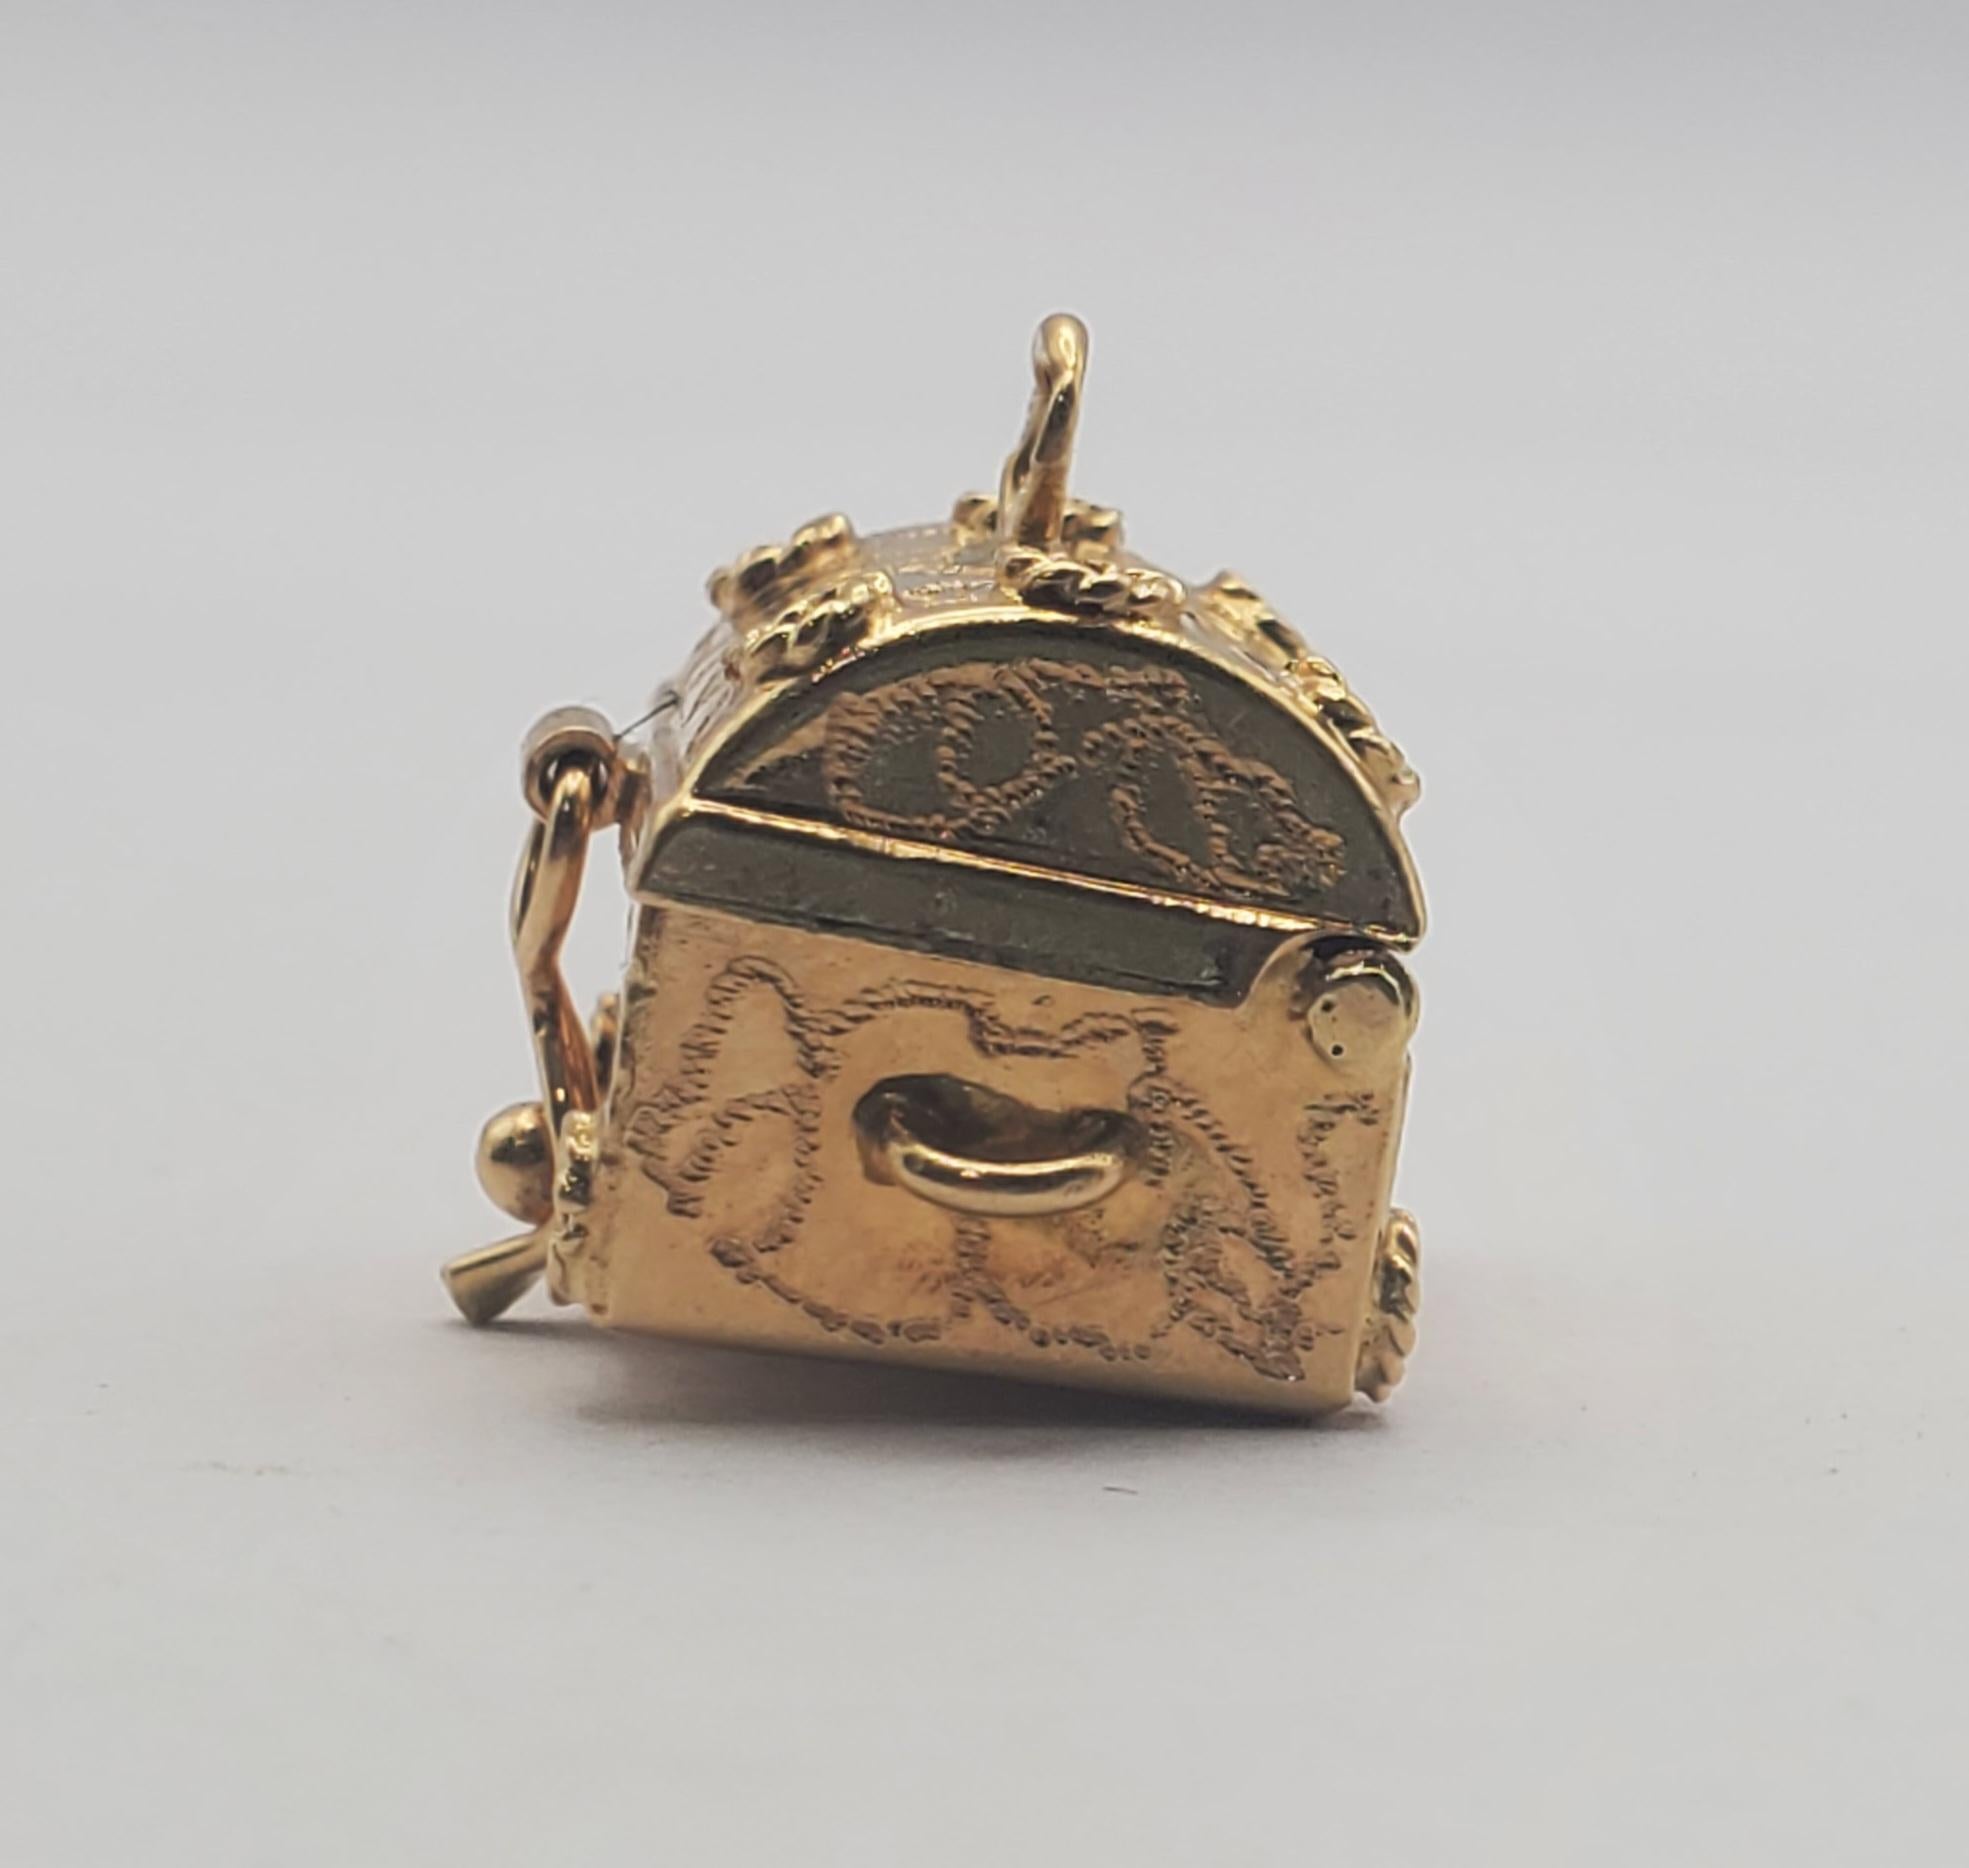 18Y Ornate Treasure Chest Charm/Pendant with Hidden Pearl Treasure In Good Condition For Sale In Pittsburgh, PA